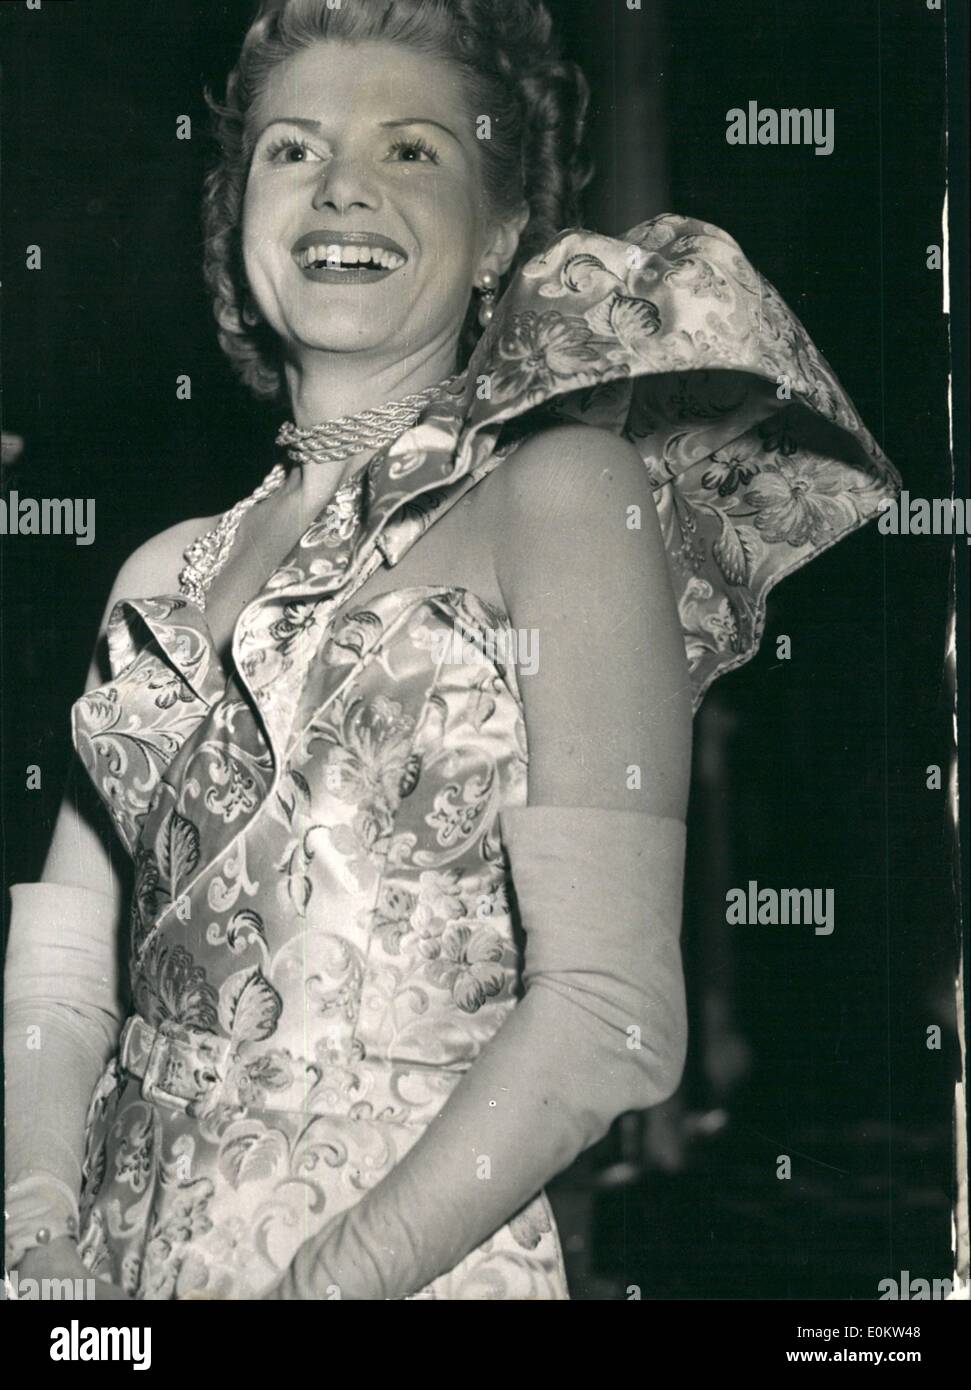 Mar. 03, 1950 - Zoe Gail's One-Shouldered Dress: Actress Zoe Gail wearing a one-shouldered dress in multi-patterned satin. The bodies is boned and strapless with a cuff-tap, and the one-shouldered effect is given by the wide frilled strip of material worm over the left shoulder and stiffened out like and outsize epaulette - Photo shows was taken during the XXVI Club's dinner, hold last night at the 21 Club in London. Stock Photo